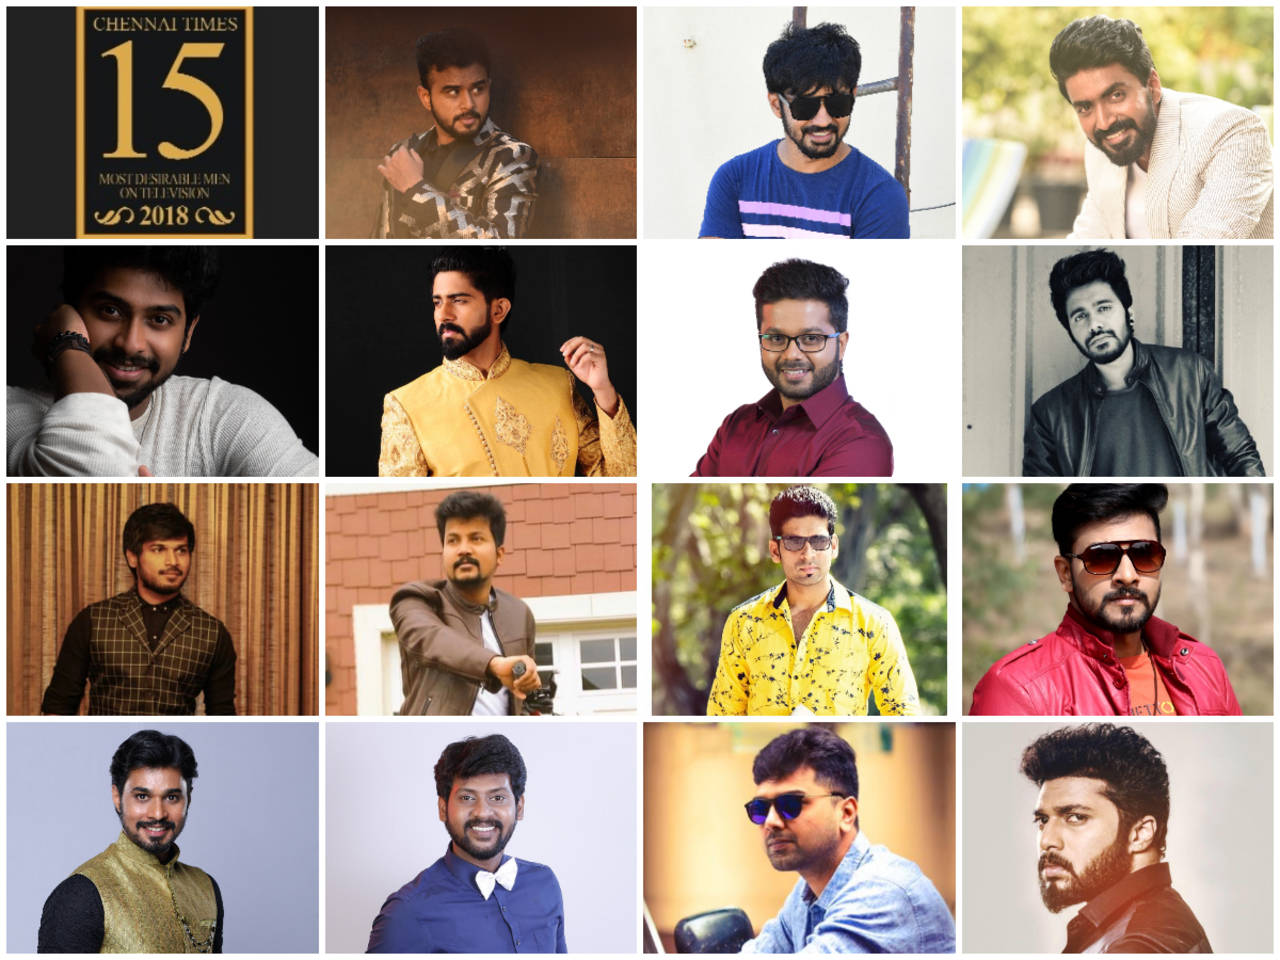 Chennai Times 15 Most Desirable Men on Television 2018 - Times of India